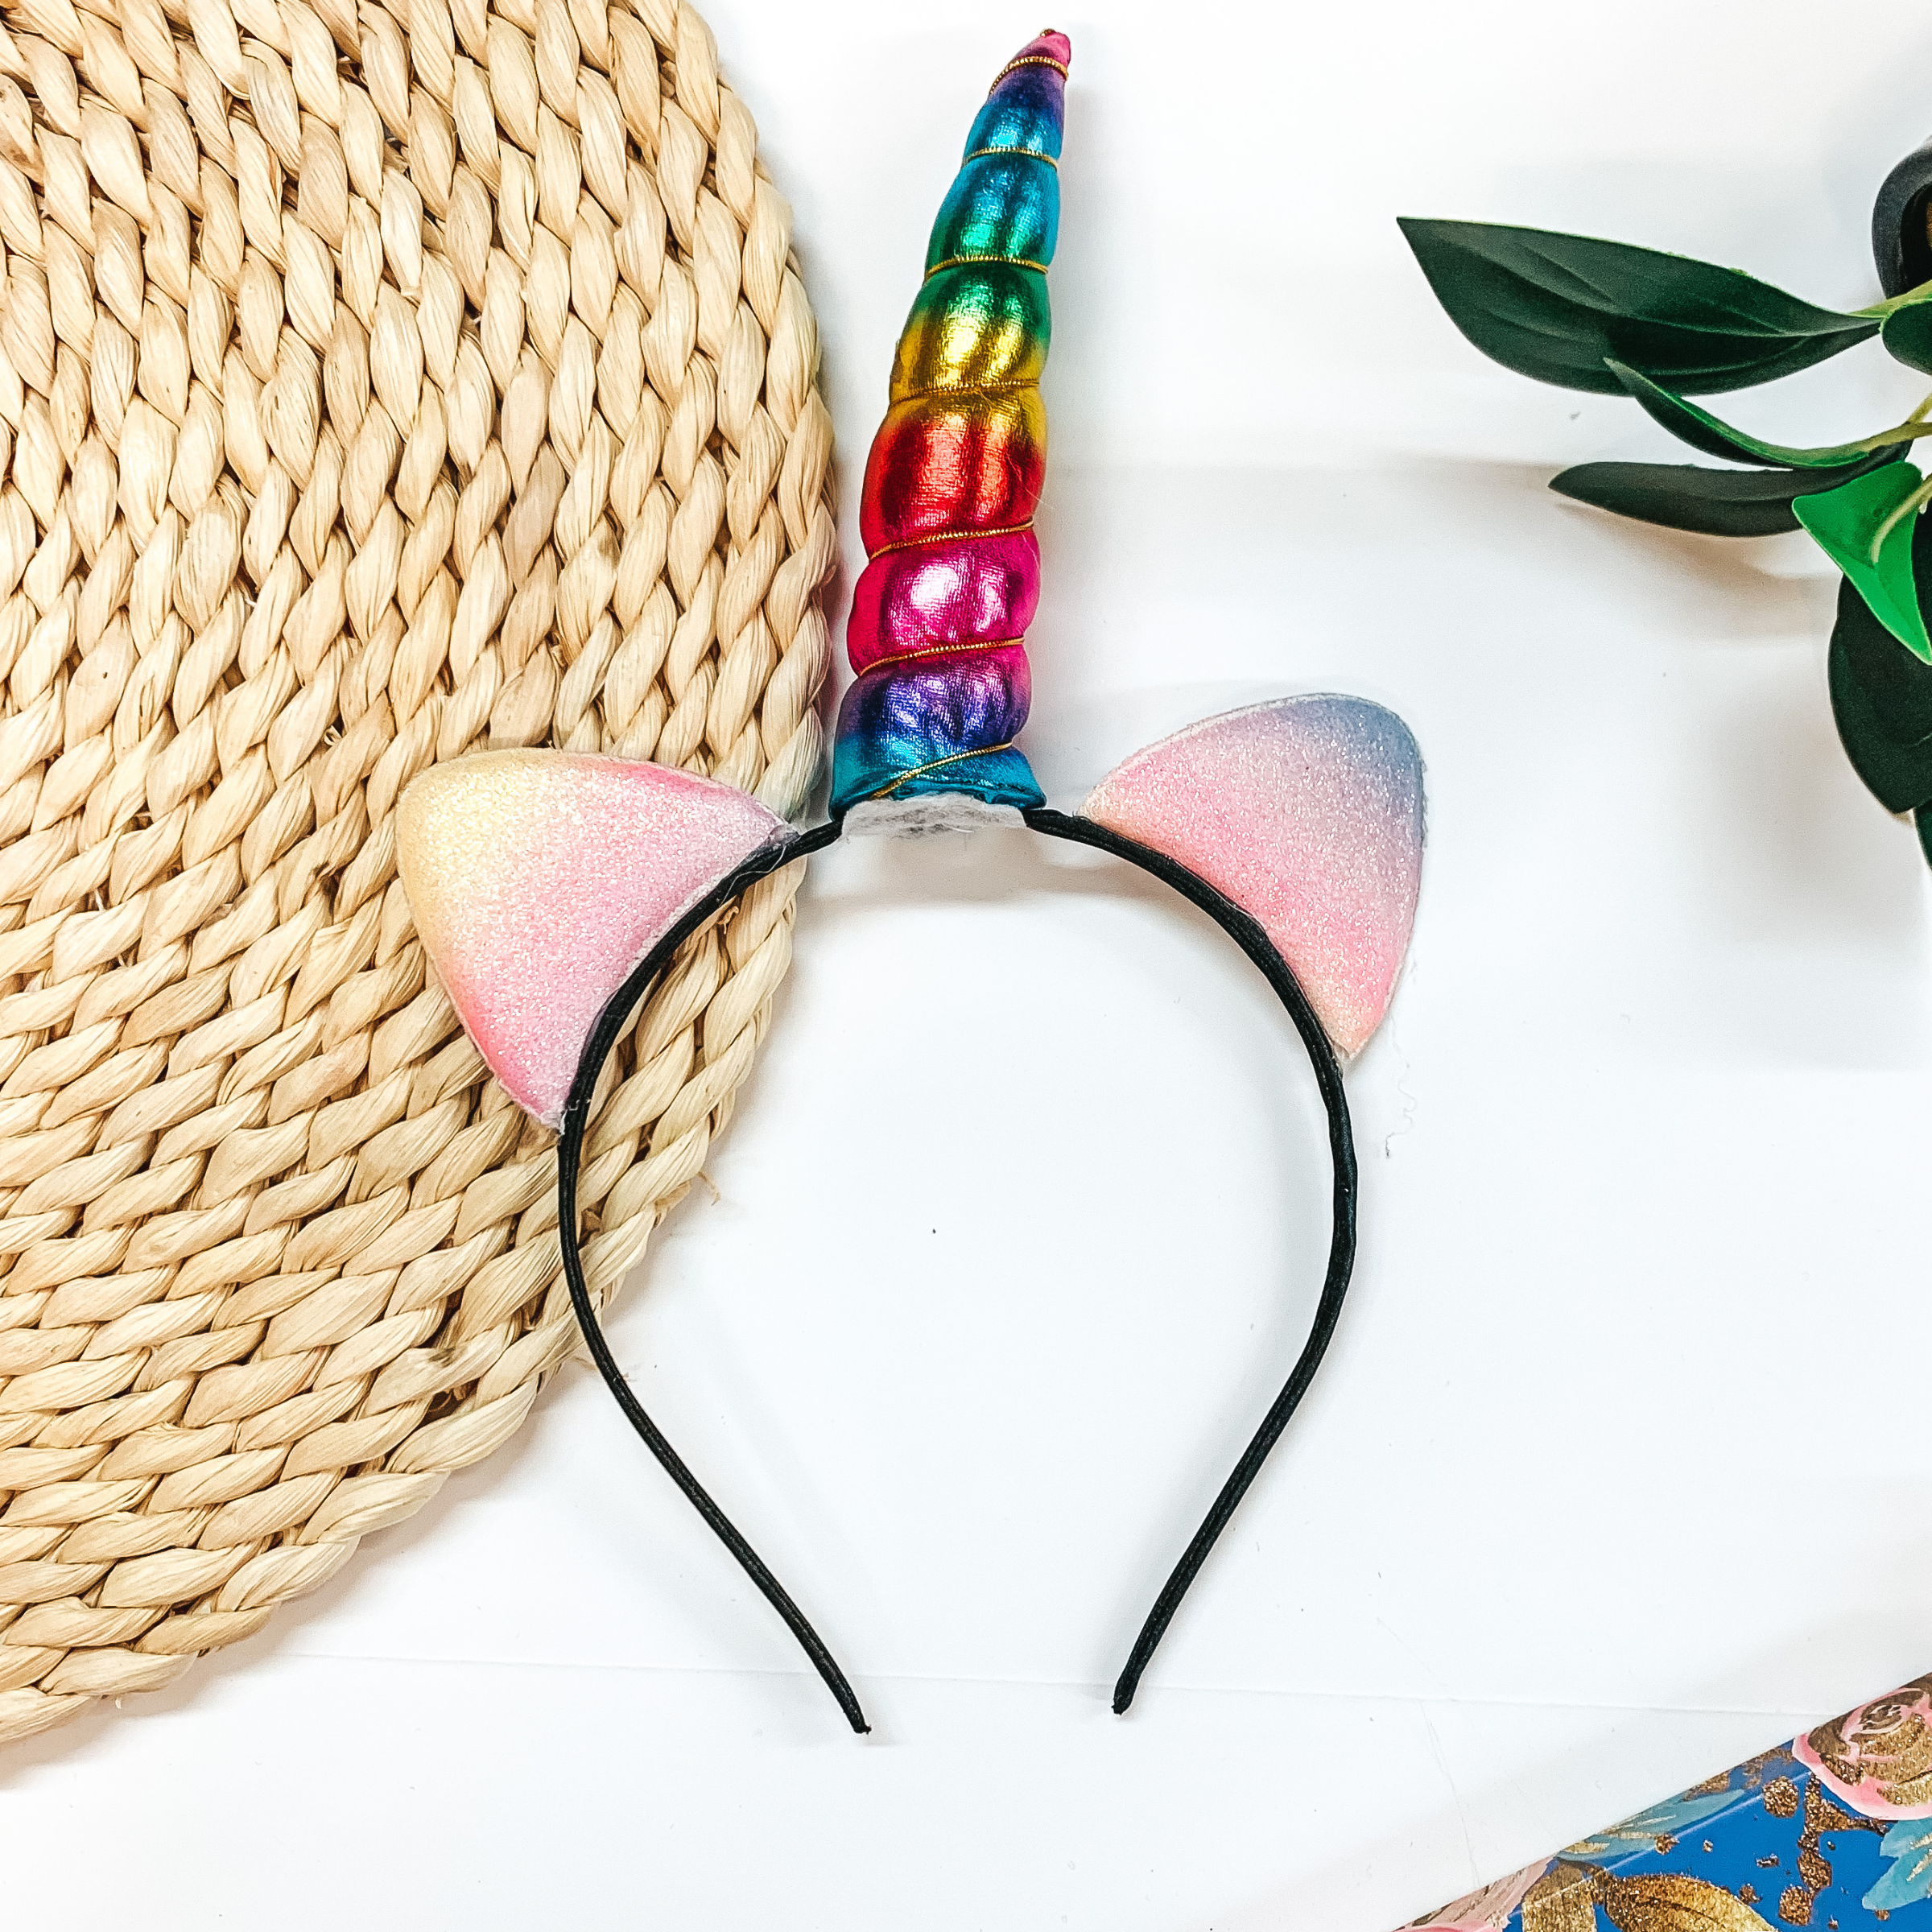 Buy 3 for $10 |  Rainbow Unicorn Headband with Ears - Giddy Up Glamour Boutique